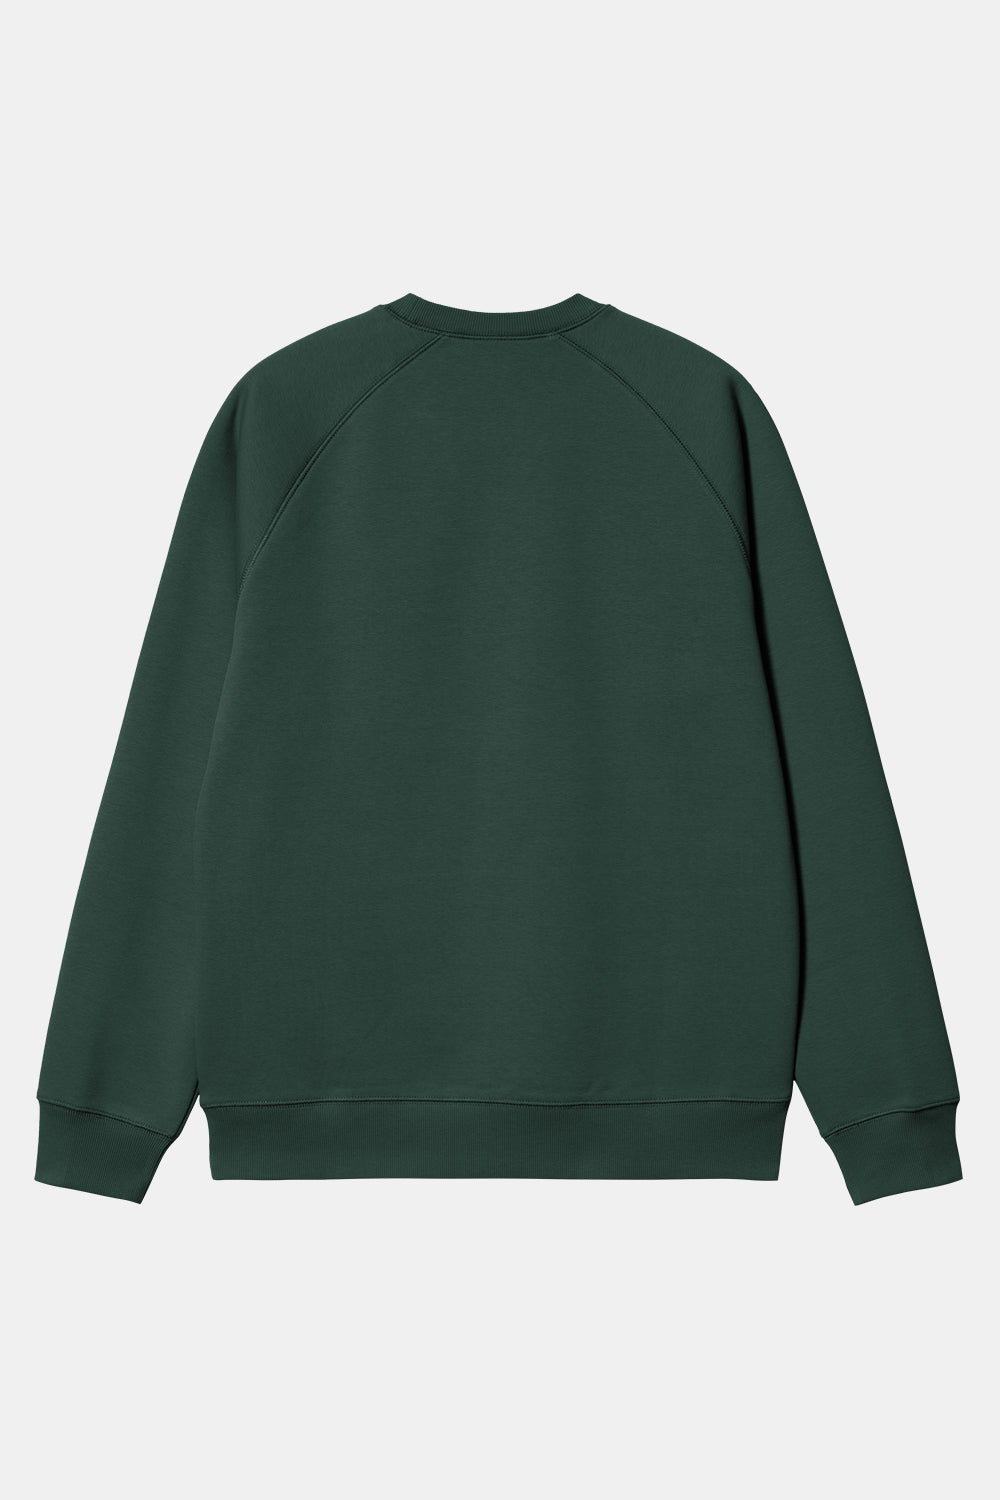 Carhartt WIP Chase Sweat (Discovery Green/Gold) | Number Six